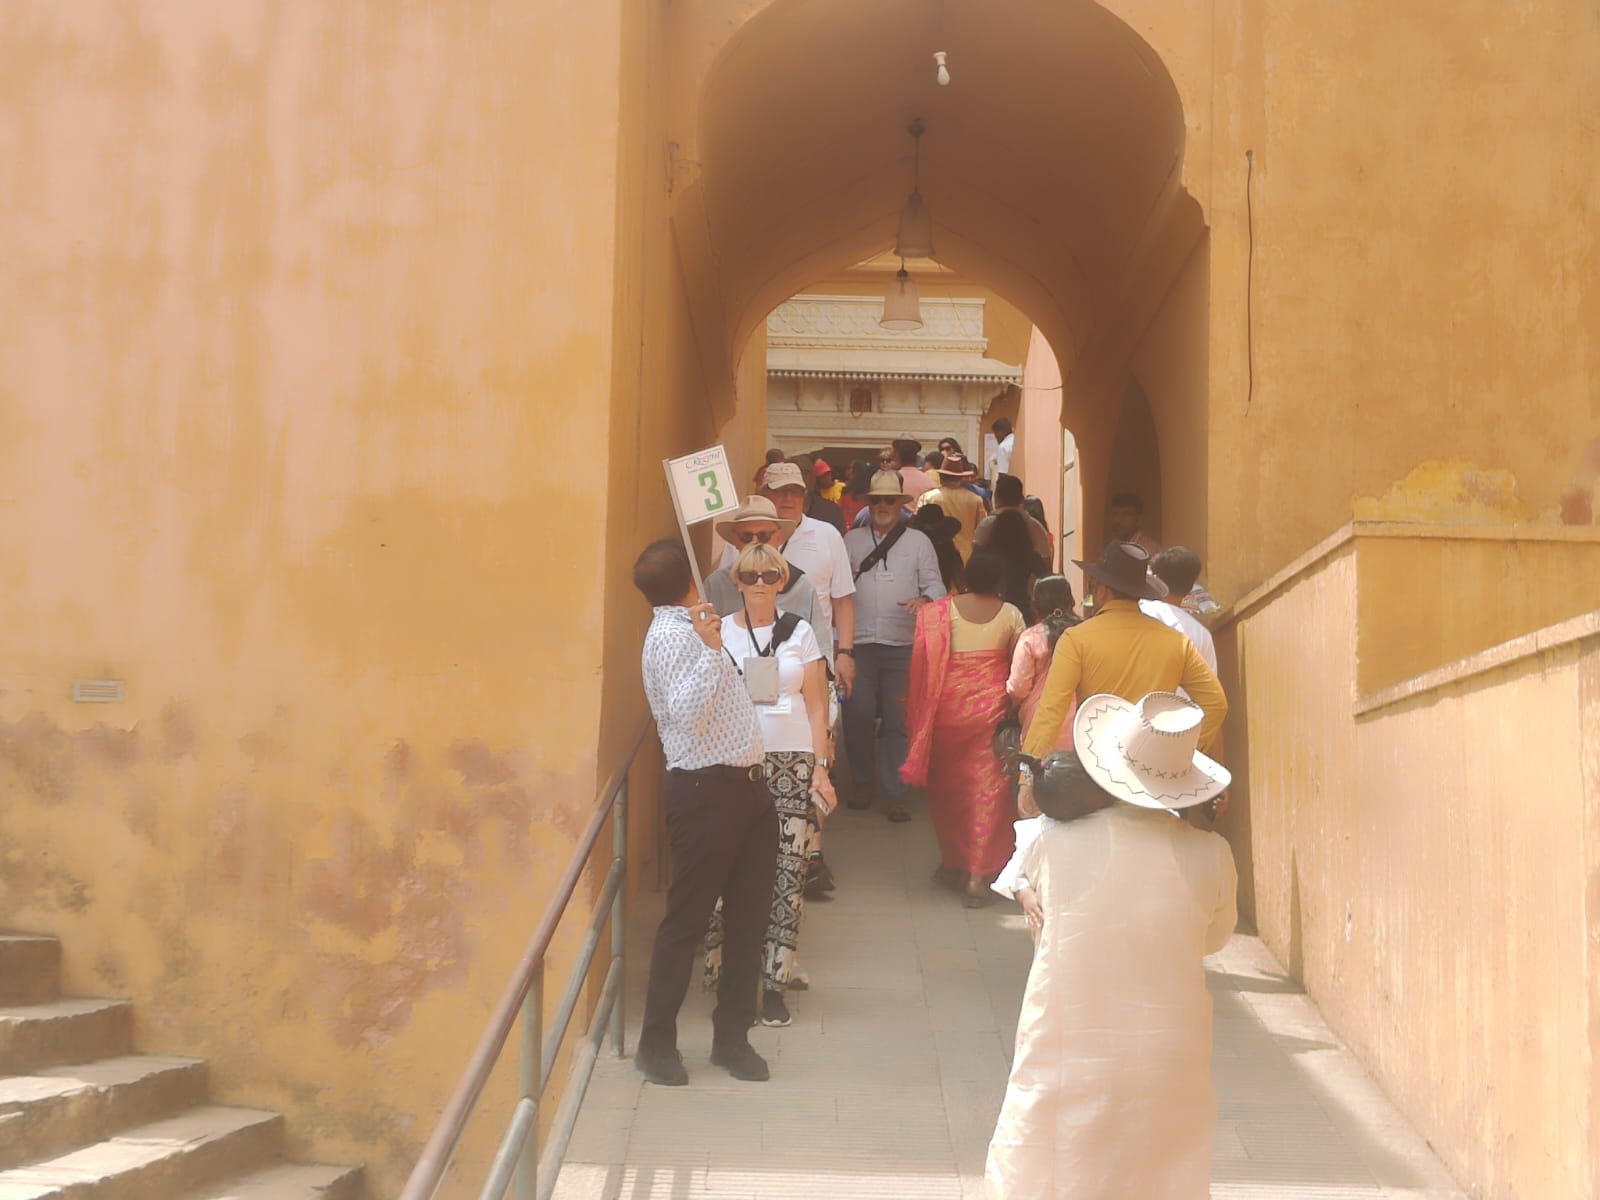 Tourists in Rajasthan